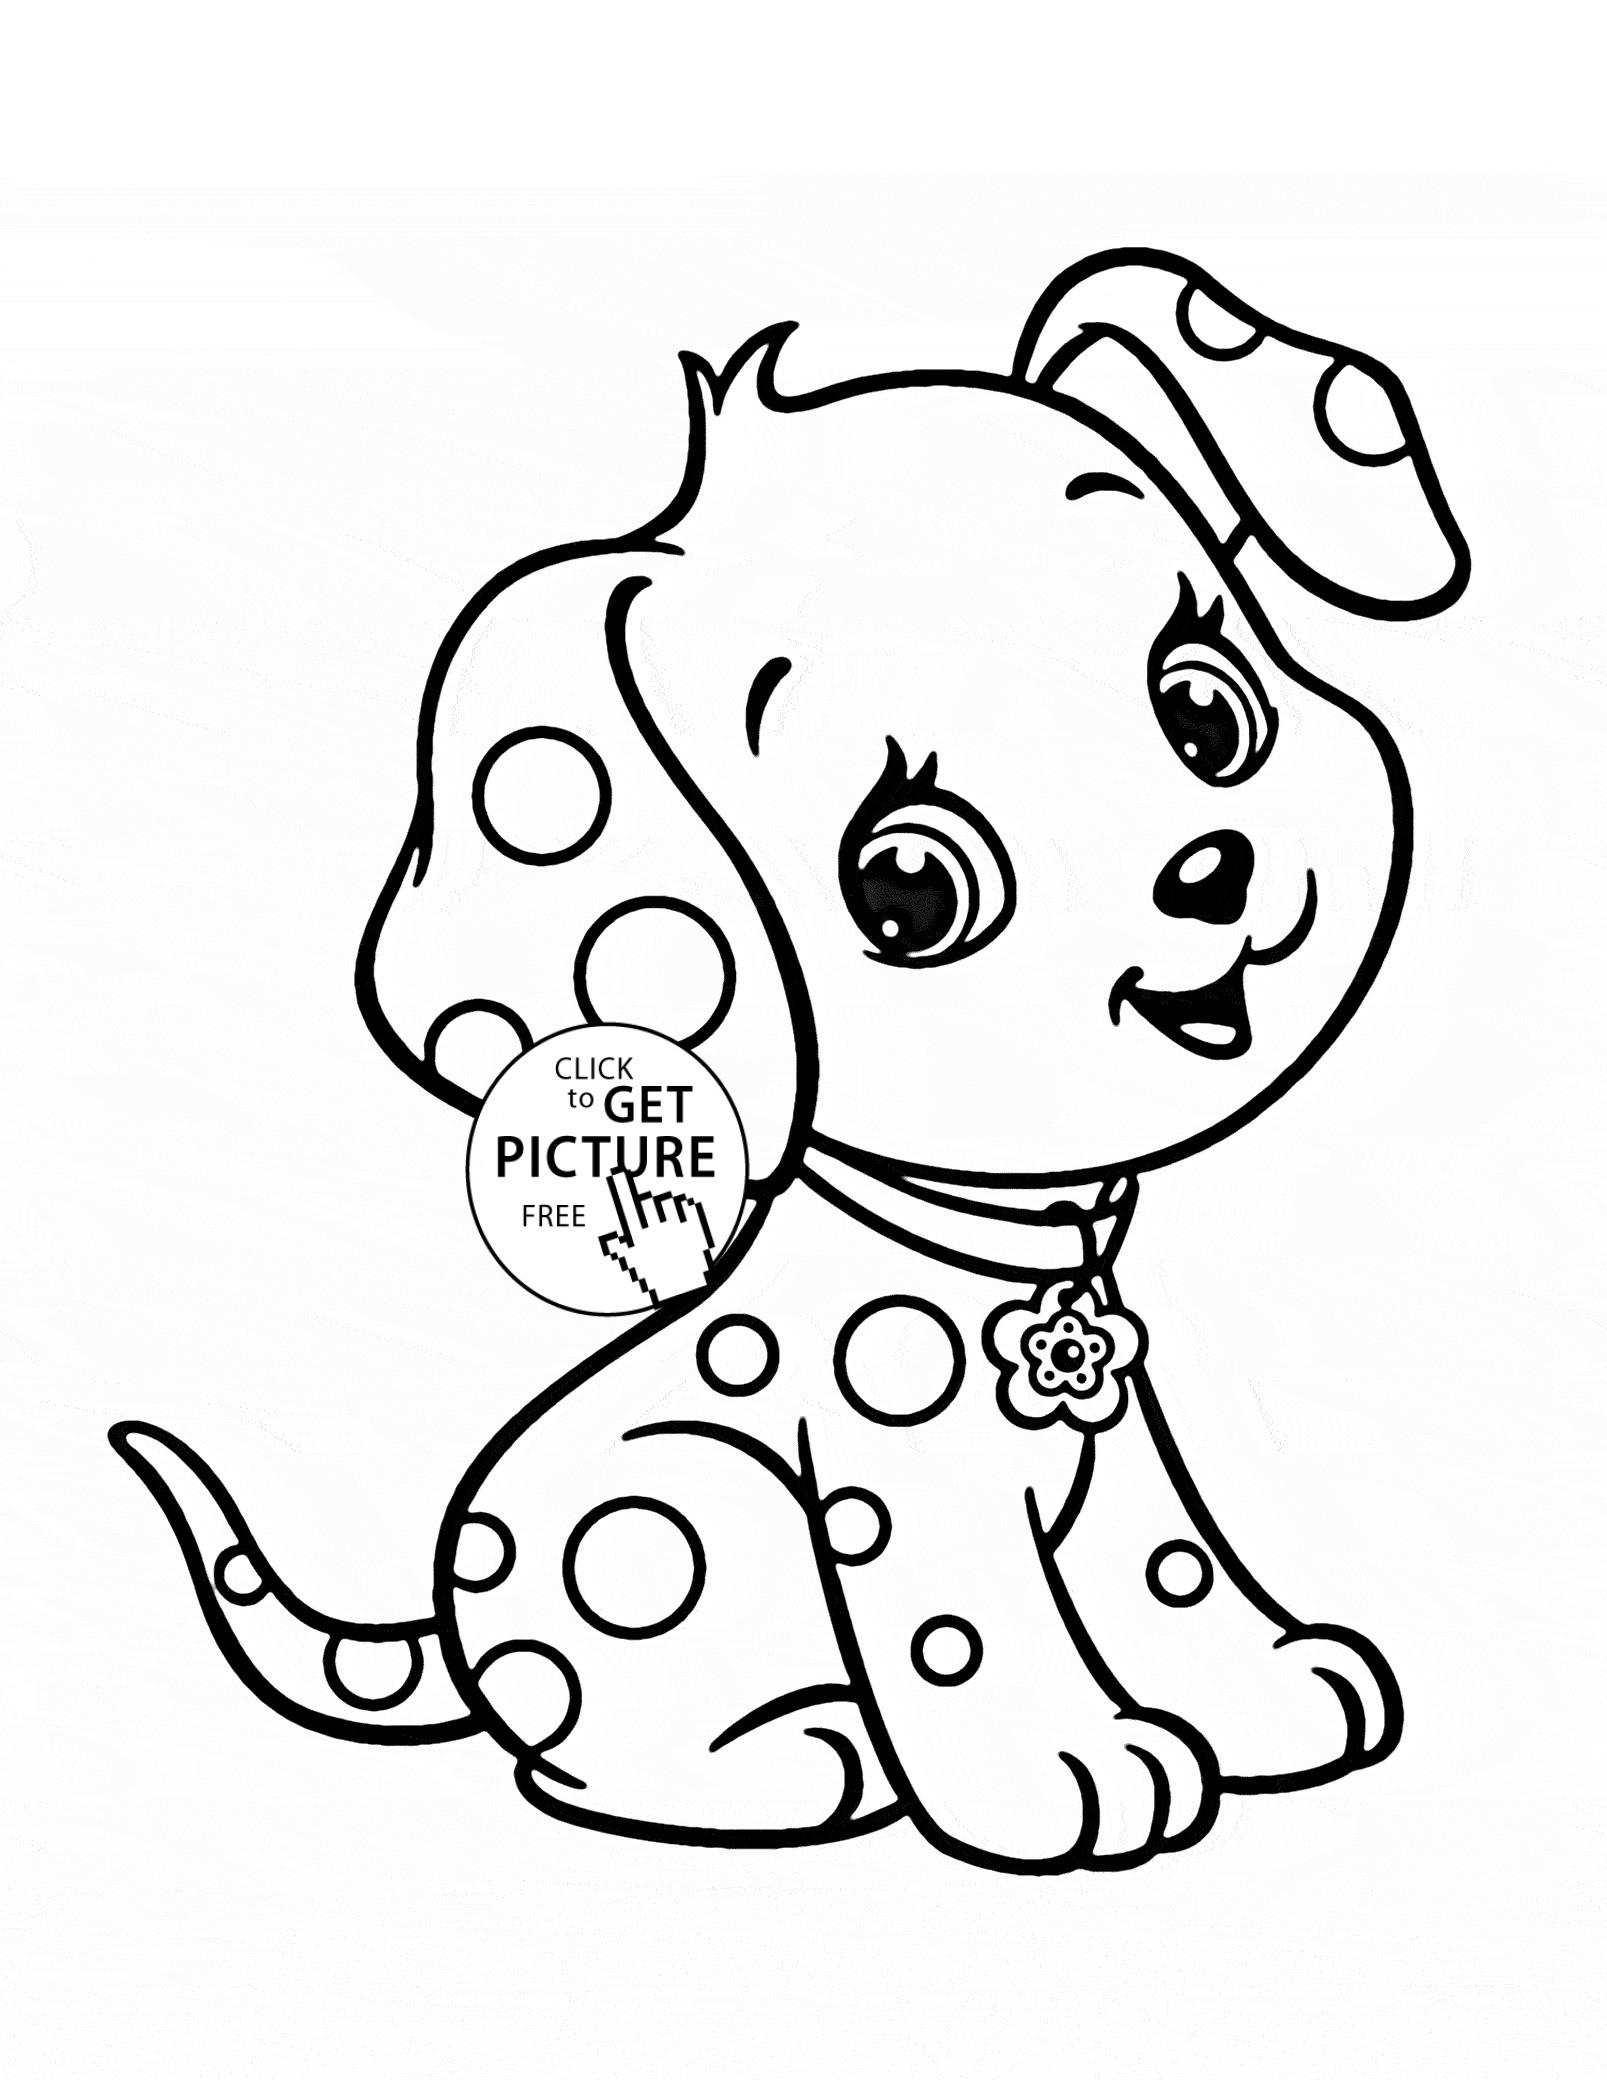 Coloring Pages Dogs Lovely Cartoon Puppy Coloring Page for Kids Animal Coloring Pages